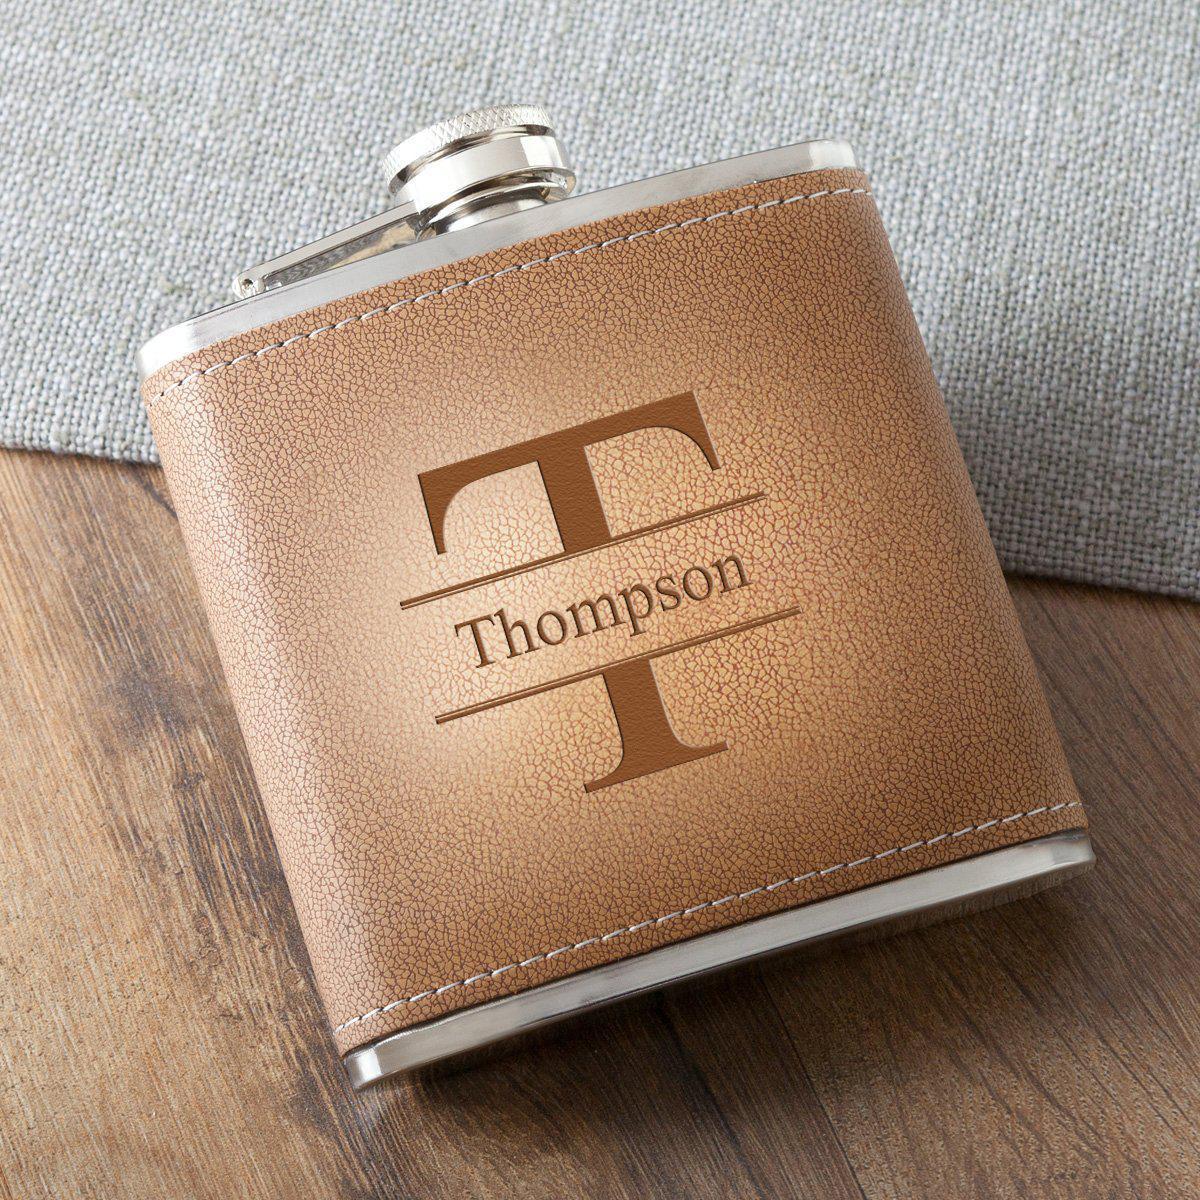 Personalized 6 oz. Leather Hide Flask